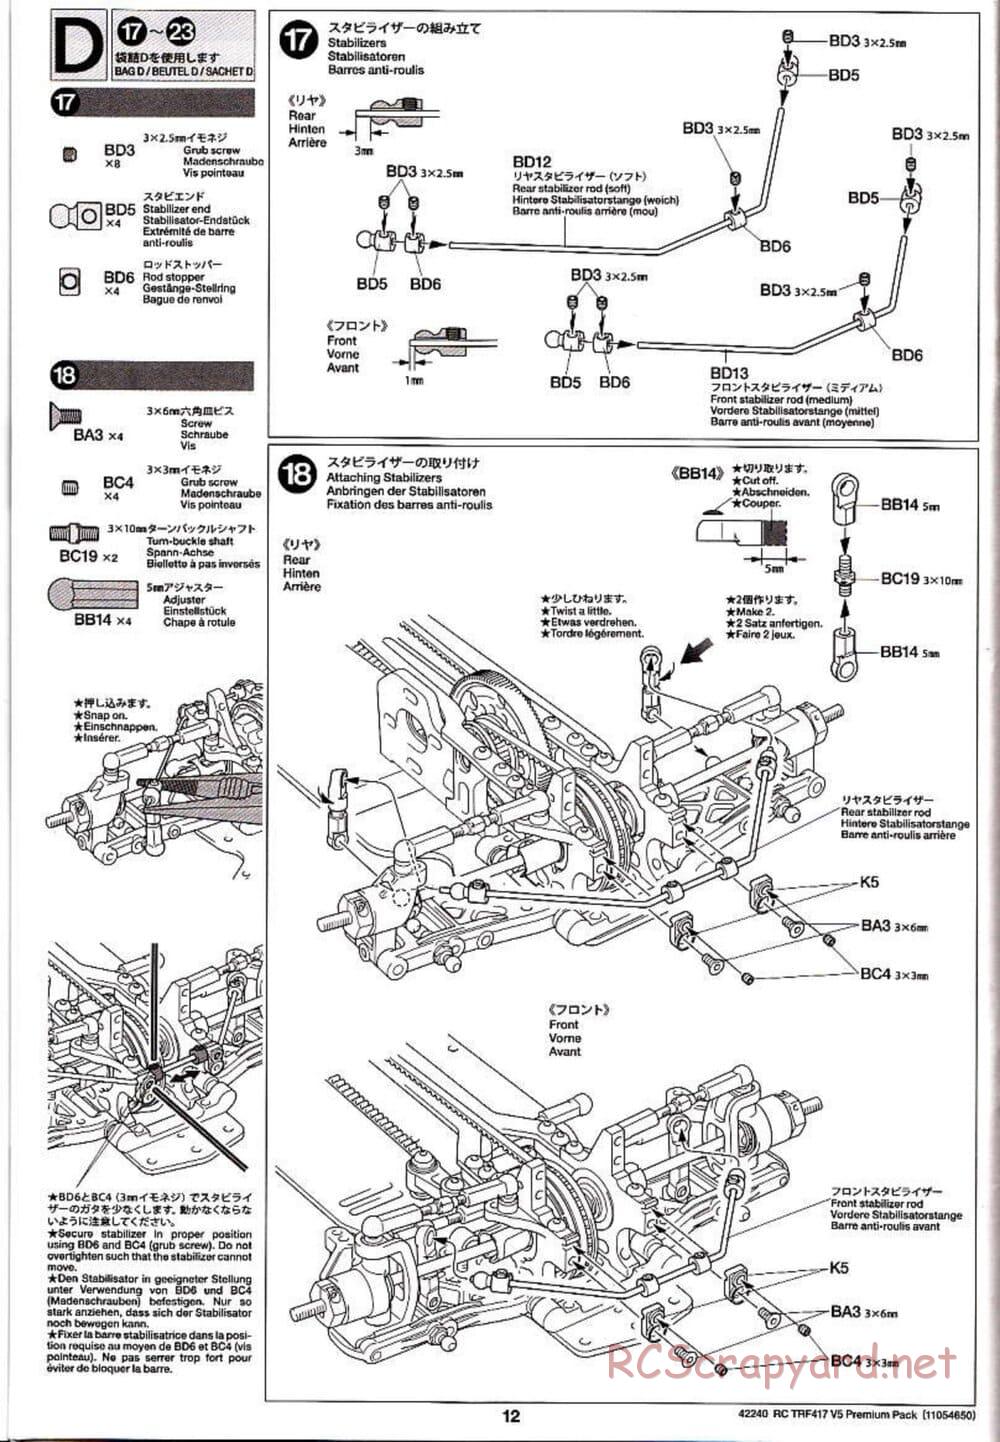 Tamiya - TRF417 V5 Premium Package Chassis - Manual - Page 12